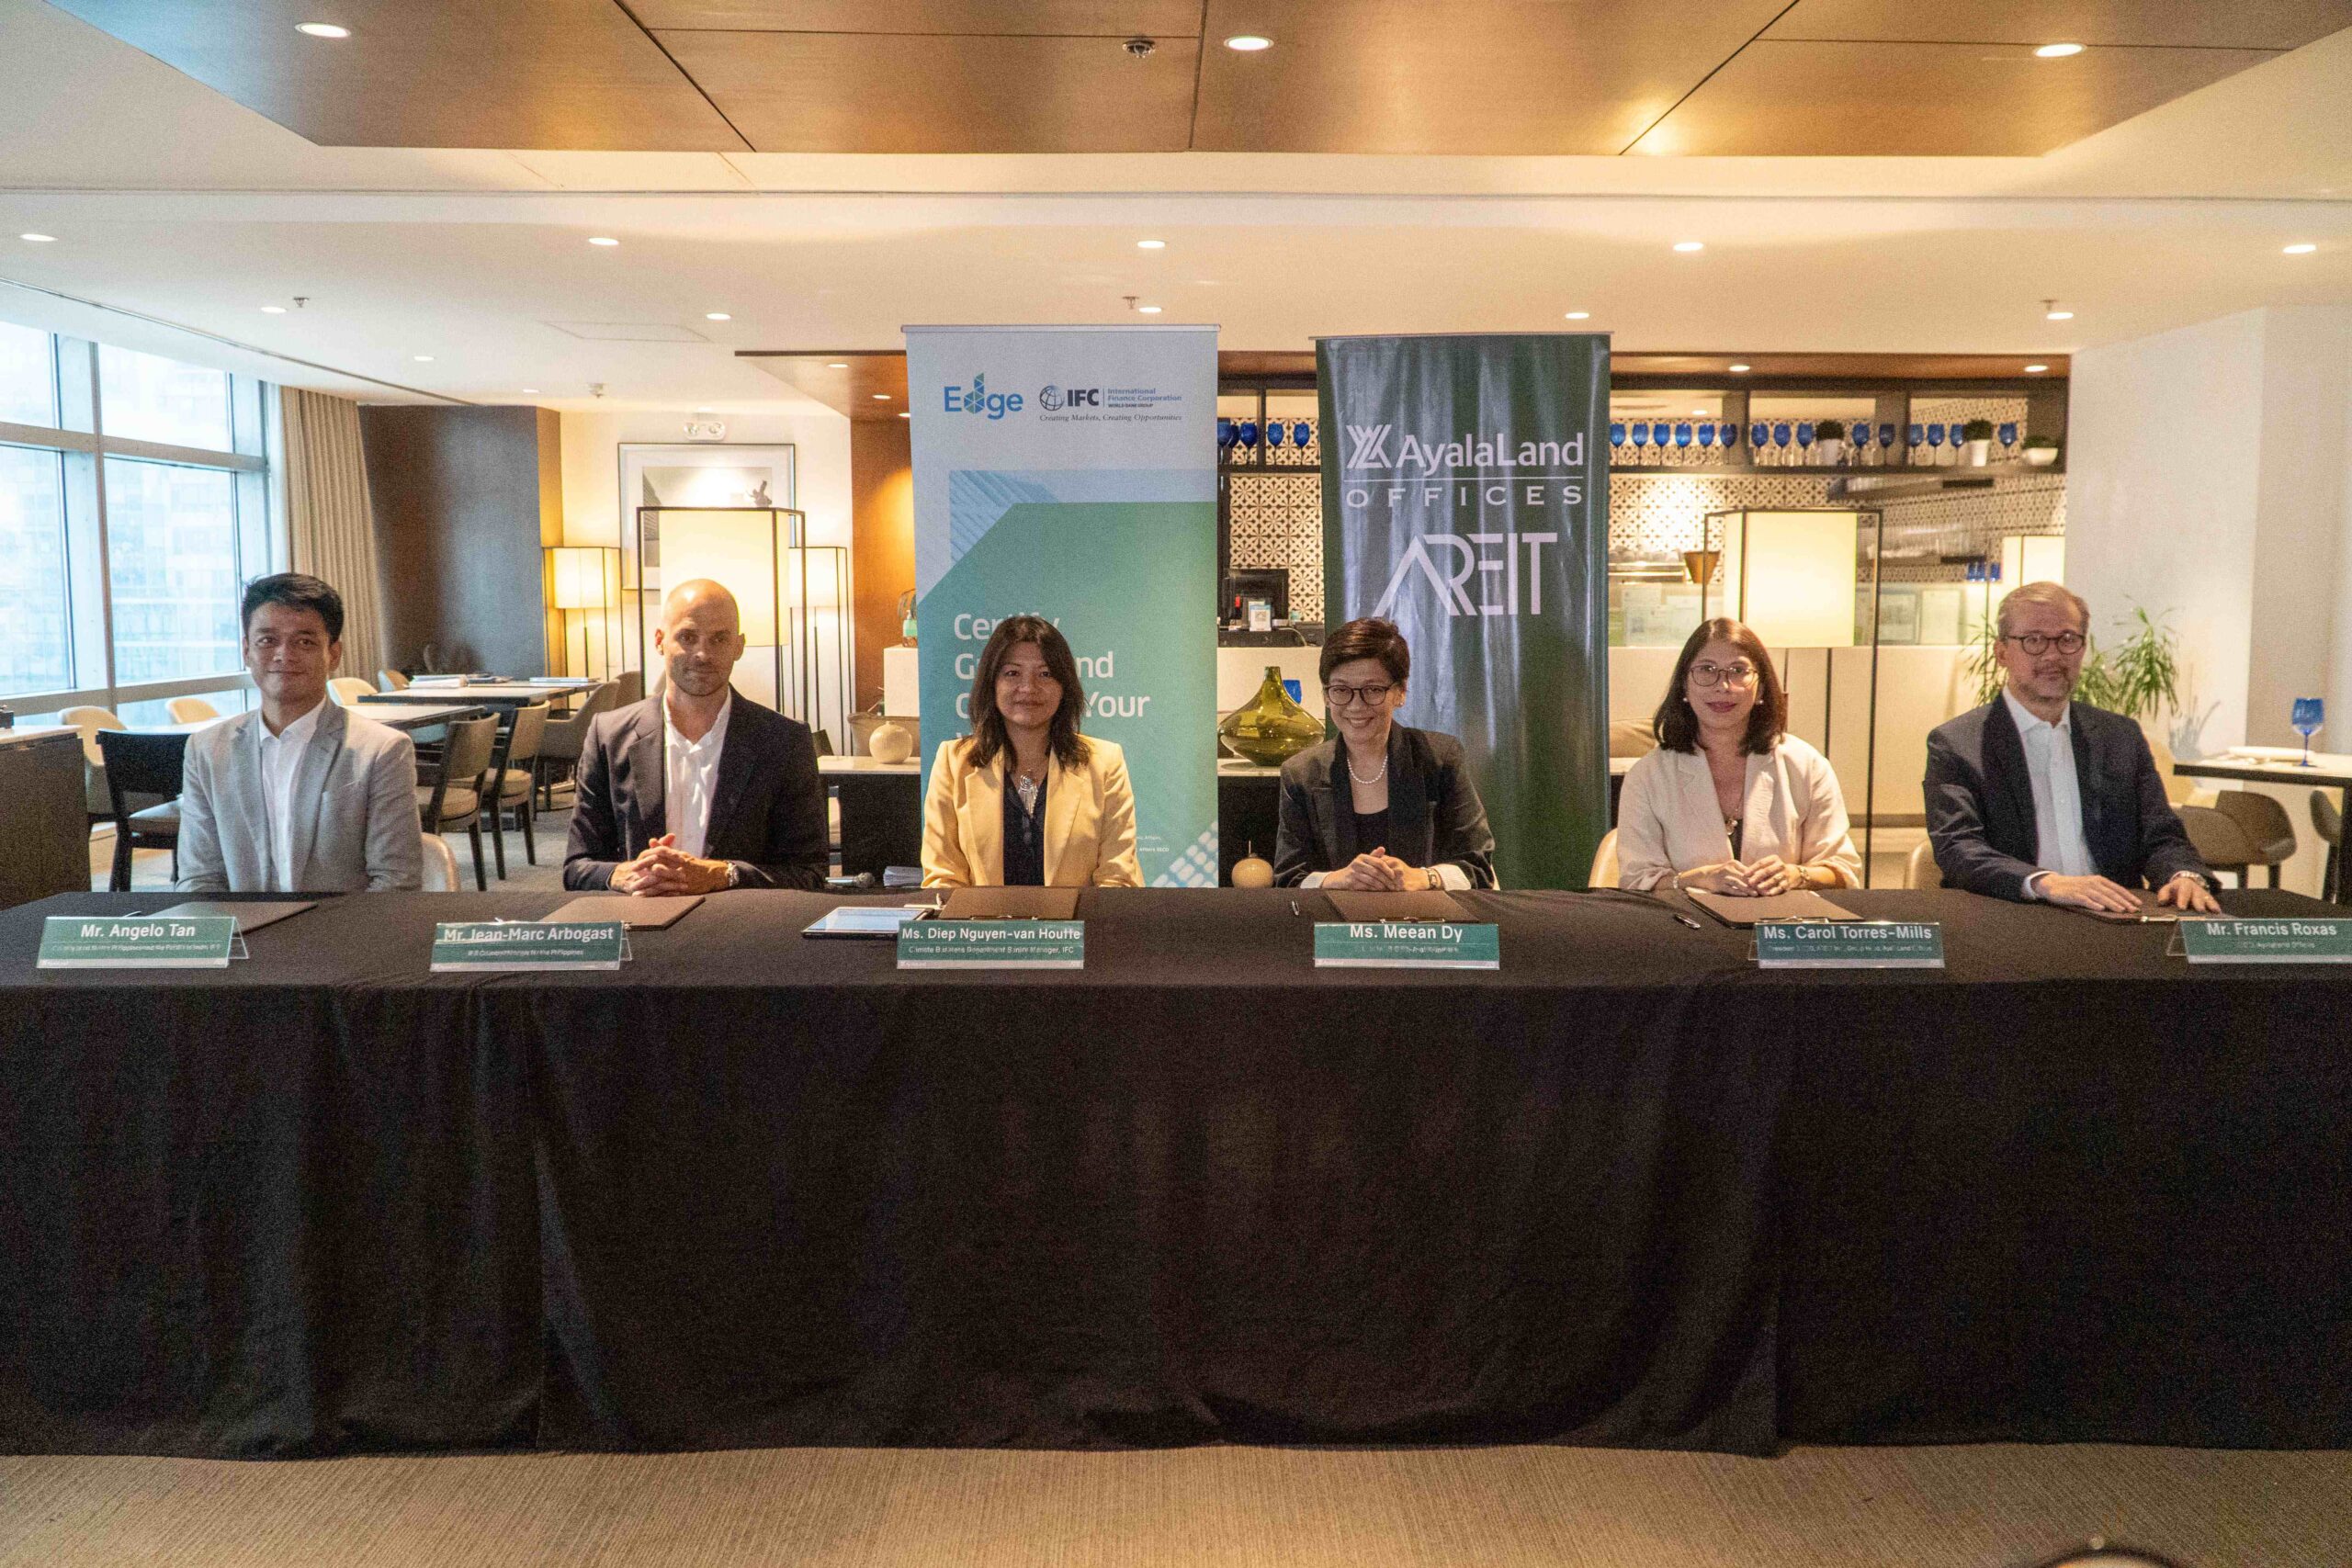 Ayala Land and IFC sign Agreement in Pursuit of World’s Largest EDGE Zero Carbon-Certified Leasing Portfolio